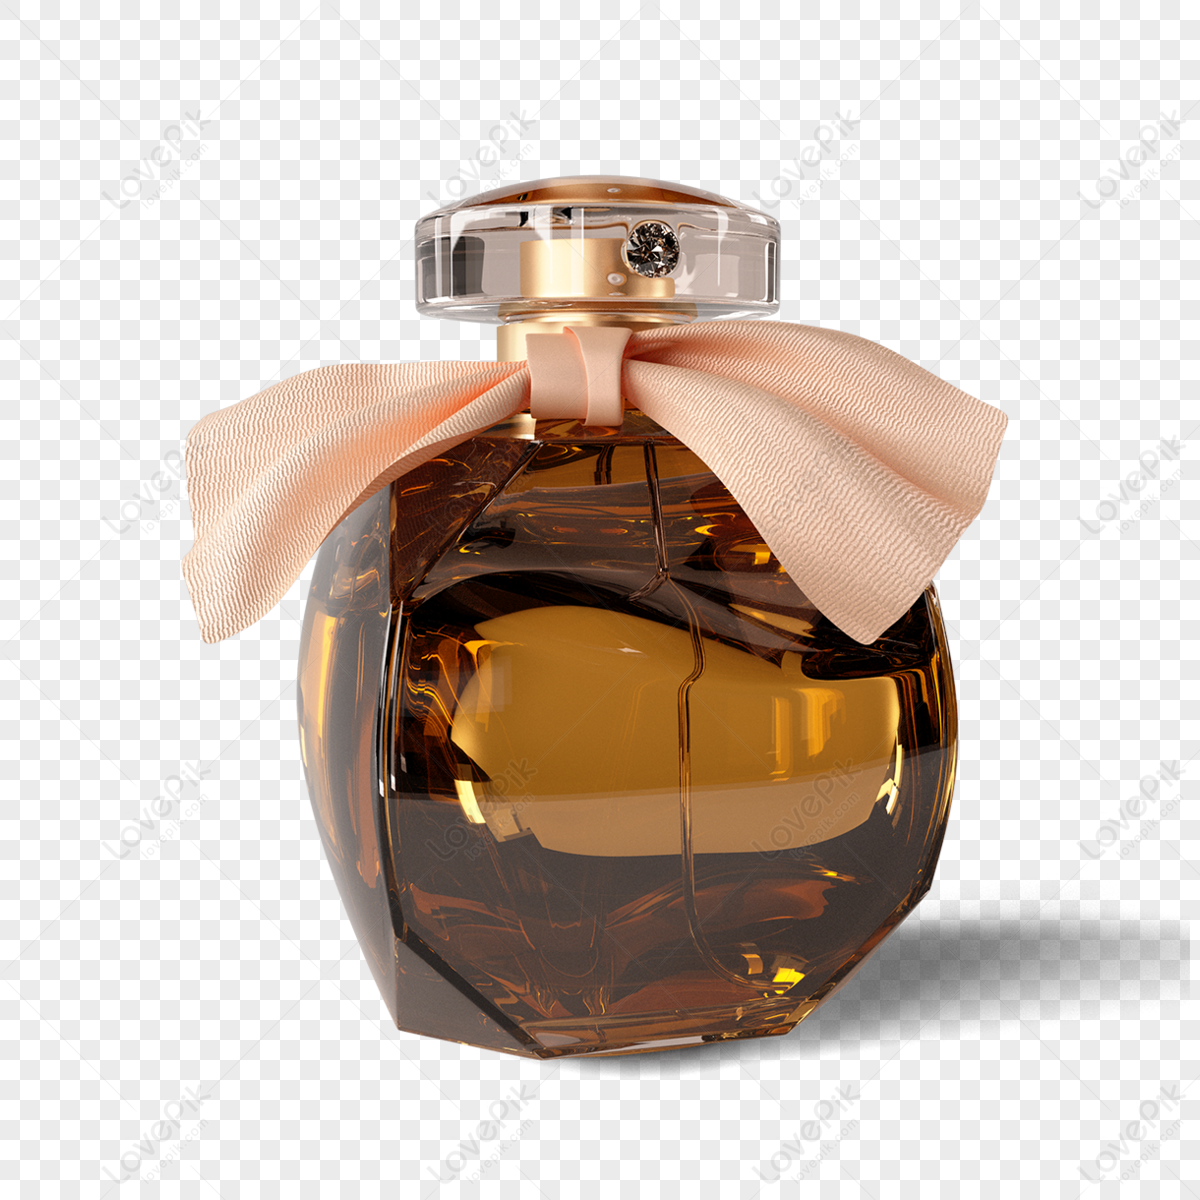 Bow Perfume Bottle PNG Images With Transparent Background | Free ...